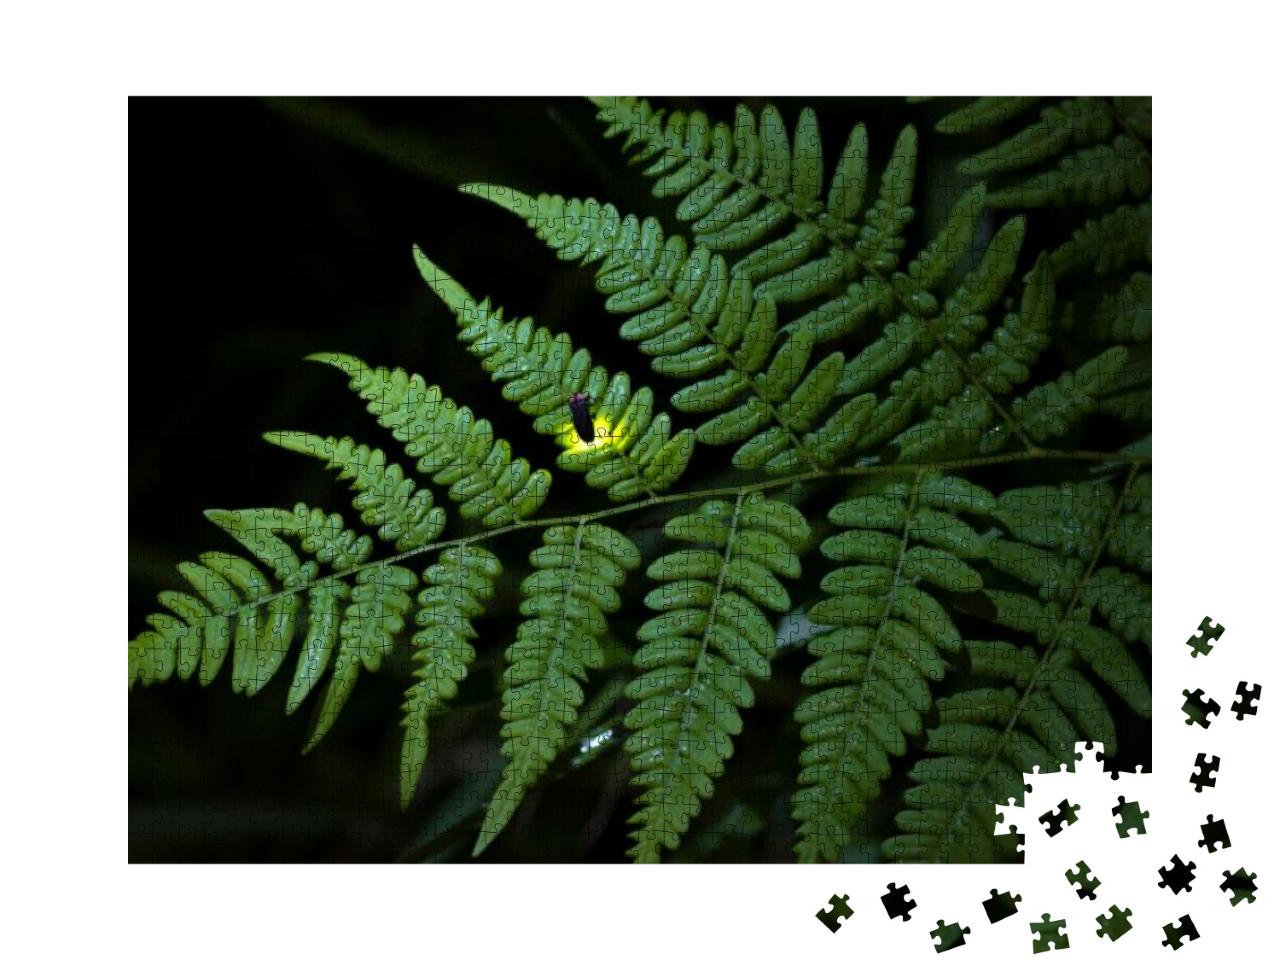 Fireflies Are a Summer Feature of Japan. a Firefly... Jigsaw Puzzle with 1000 pieces